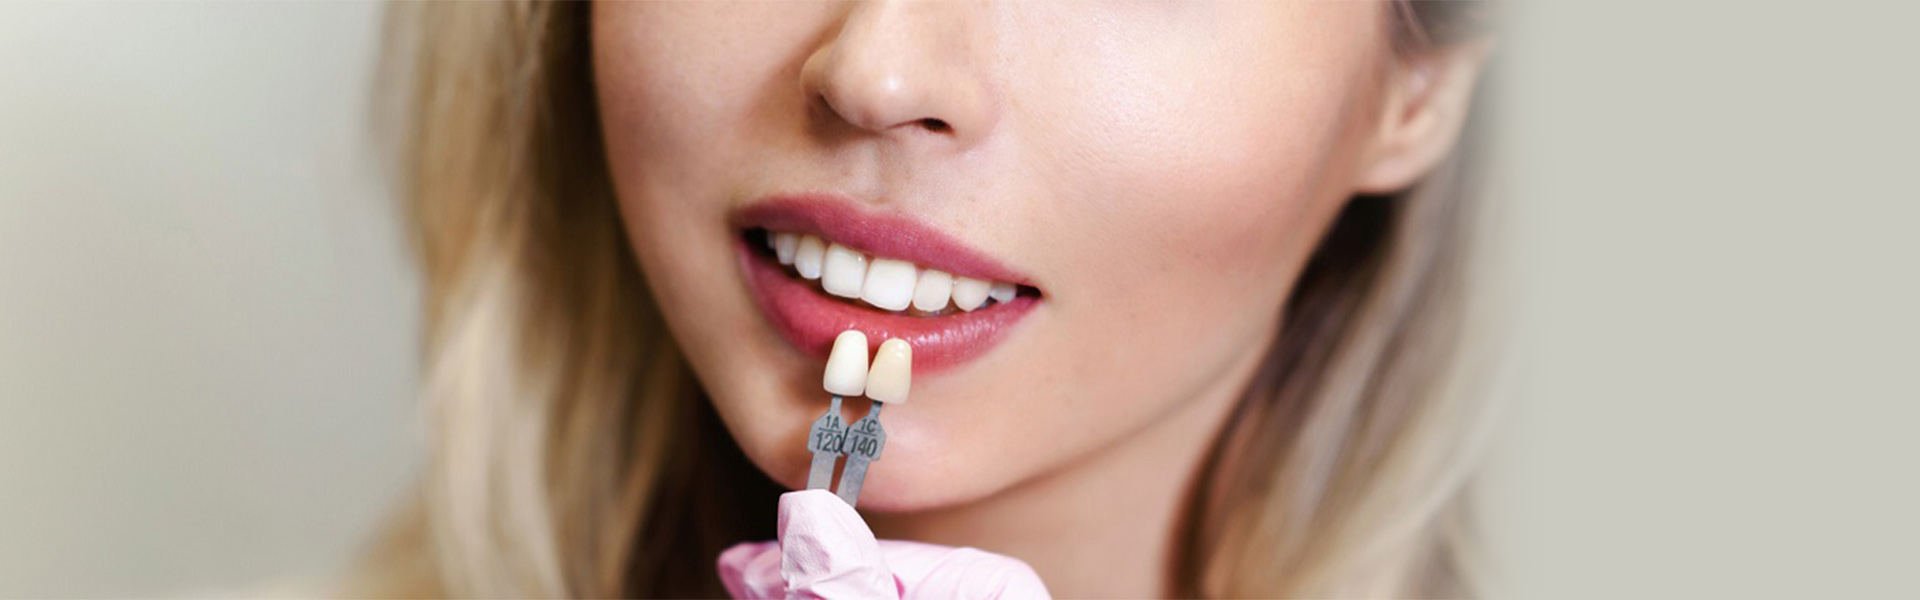 Dental Veneers 101: What You Need to Know Before Getting Them